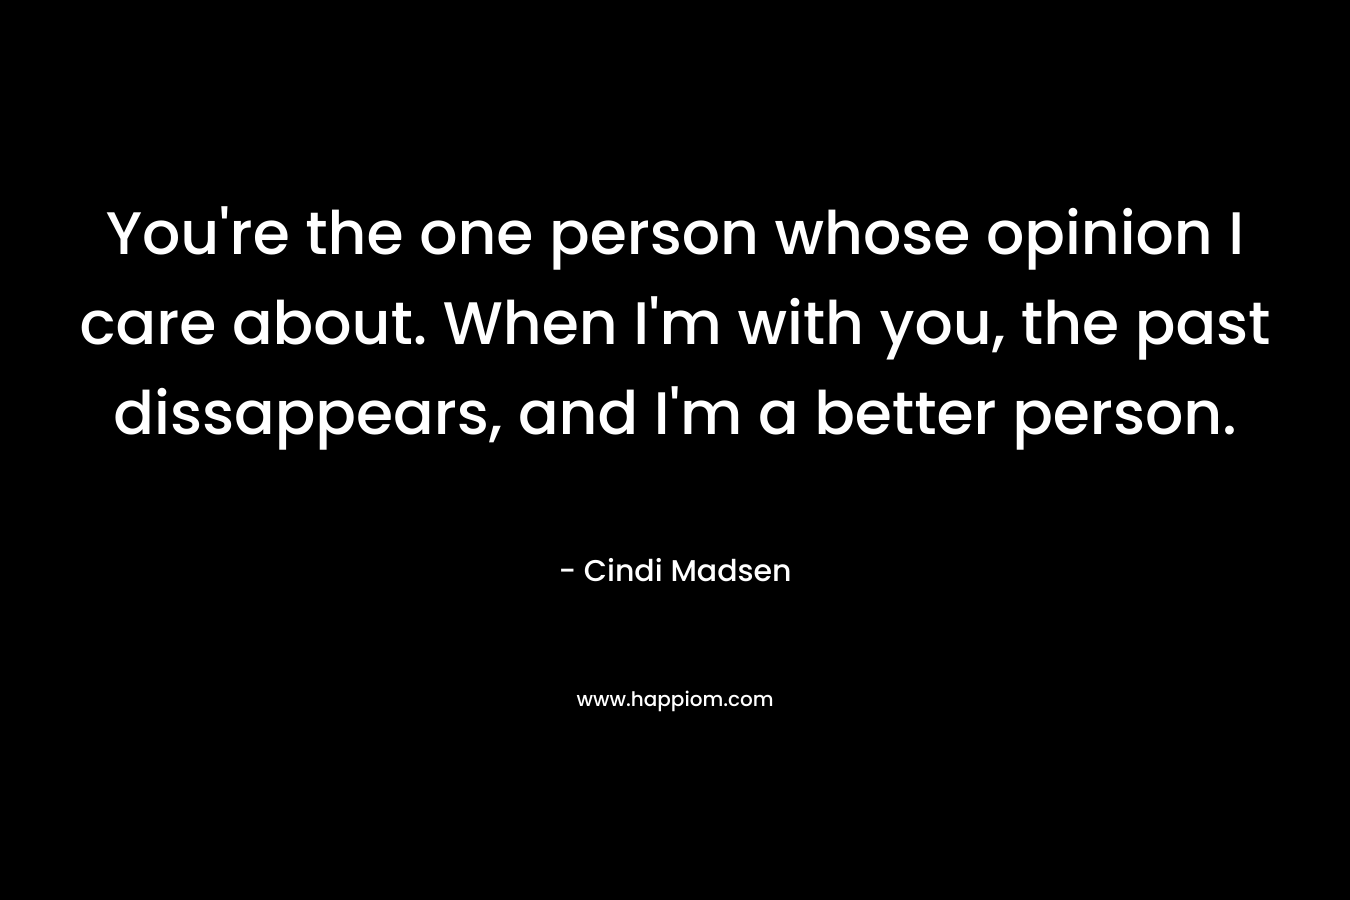 You're the one person whose opinion I care about. When I'm with you, the past dissappears, and I'm a better person.